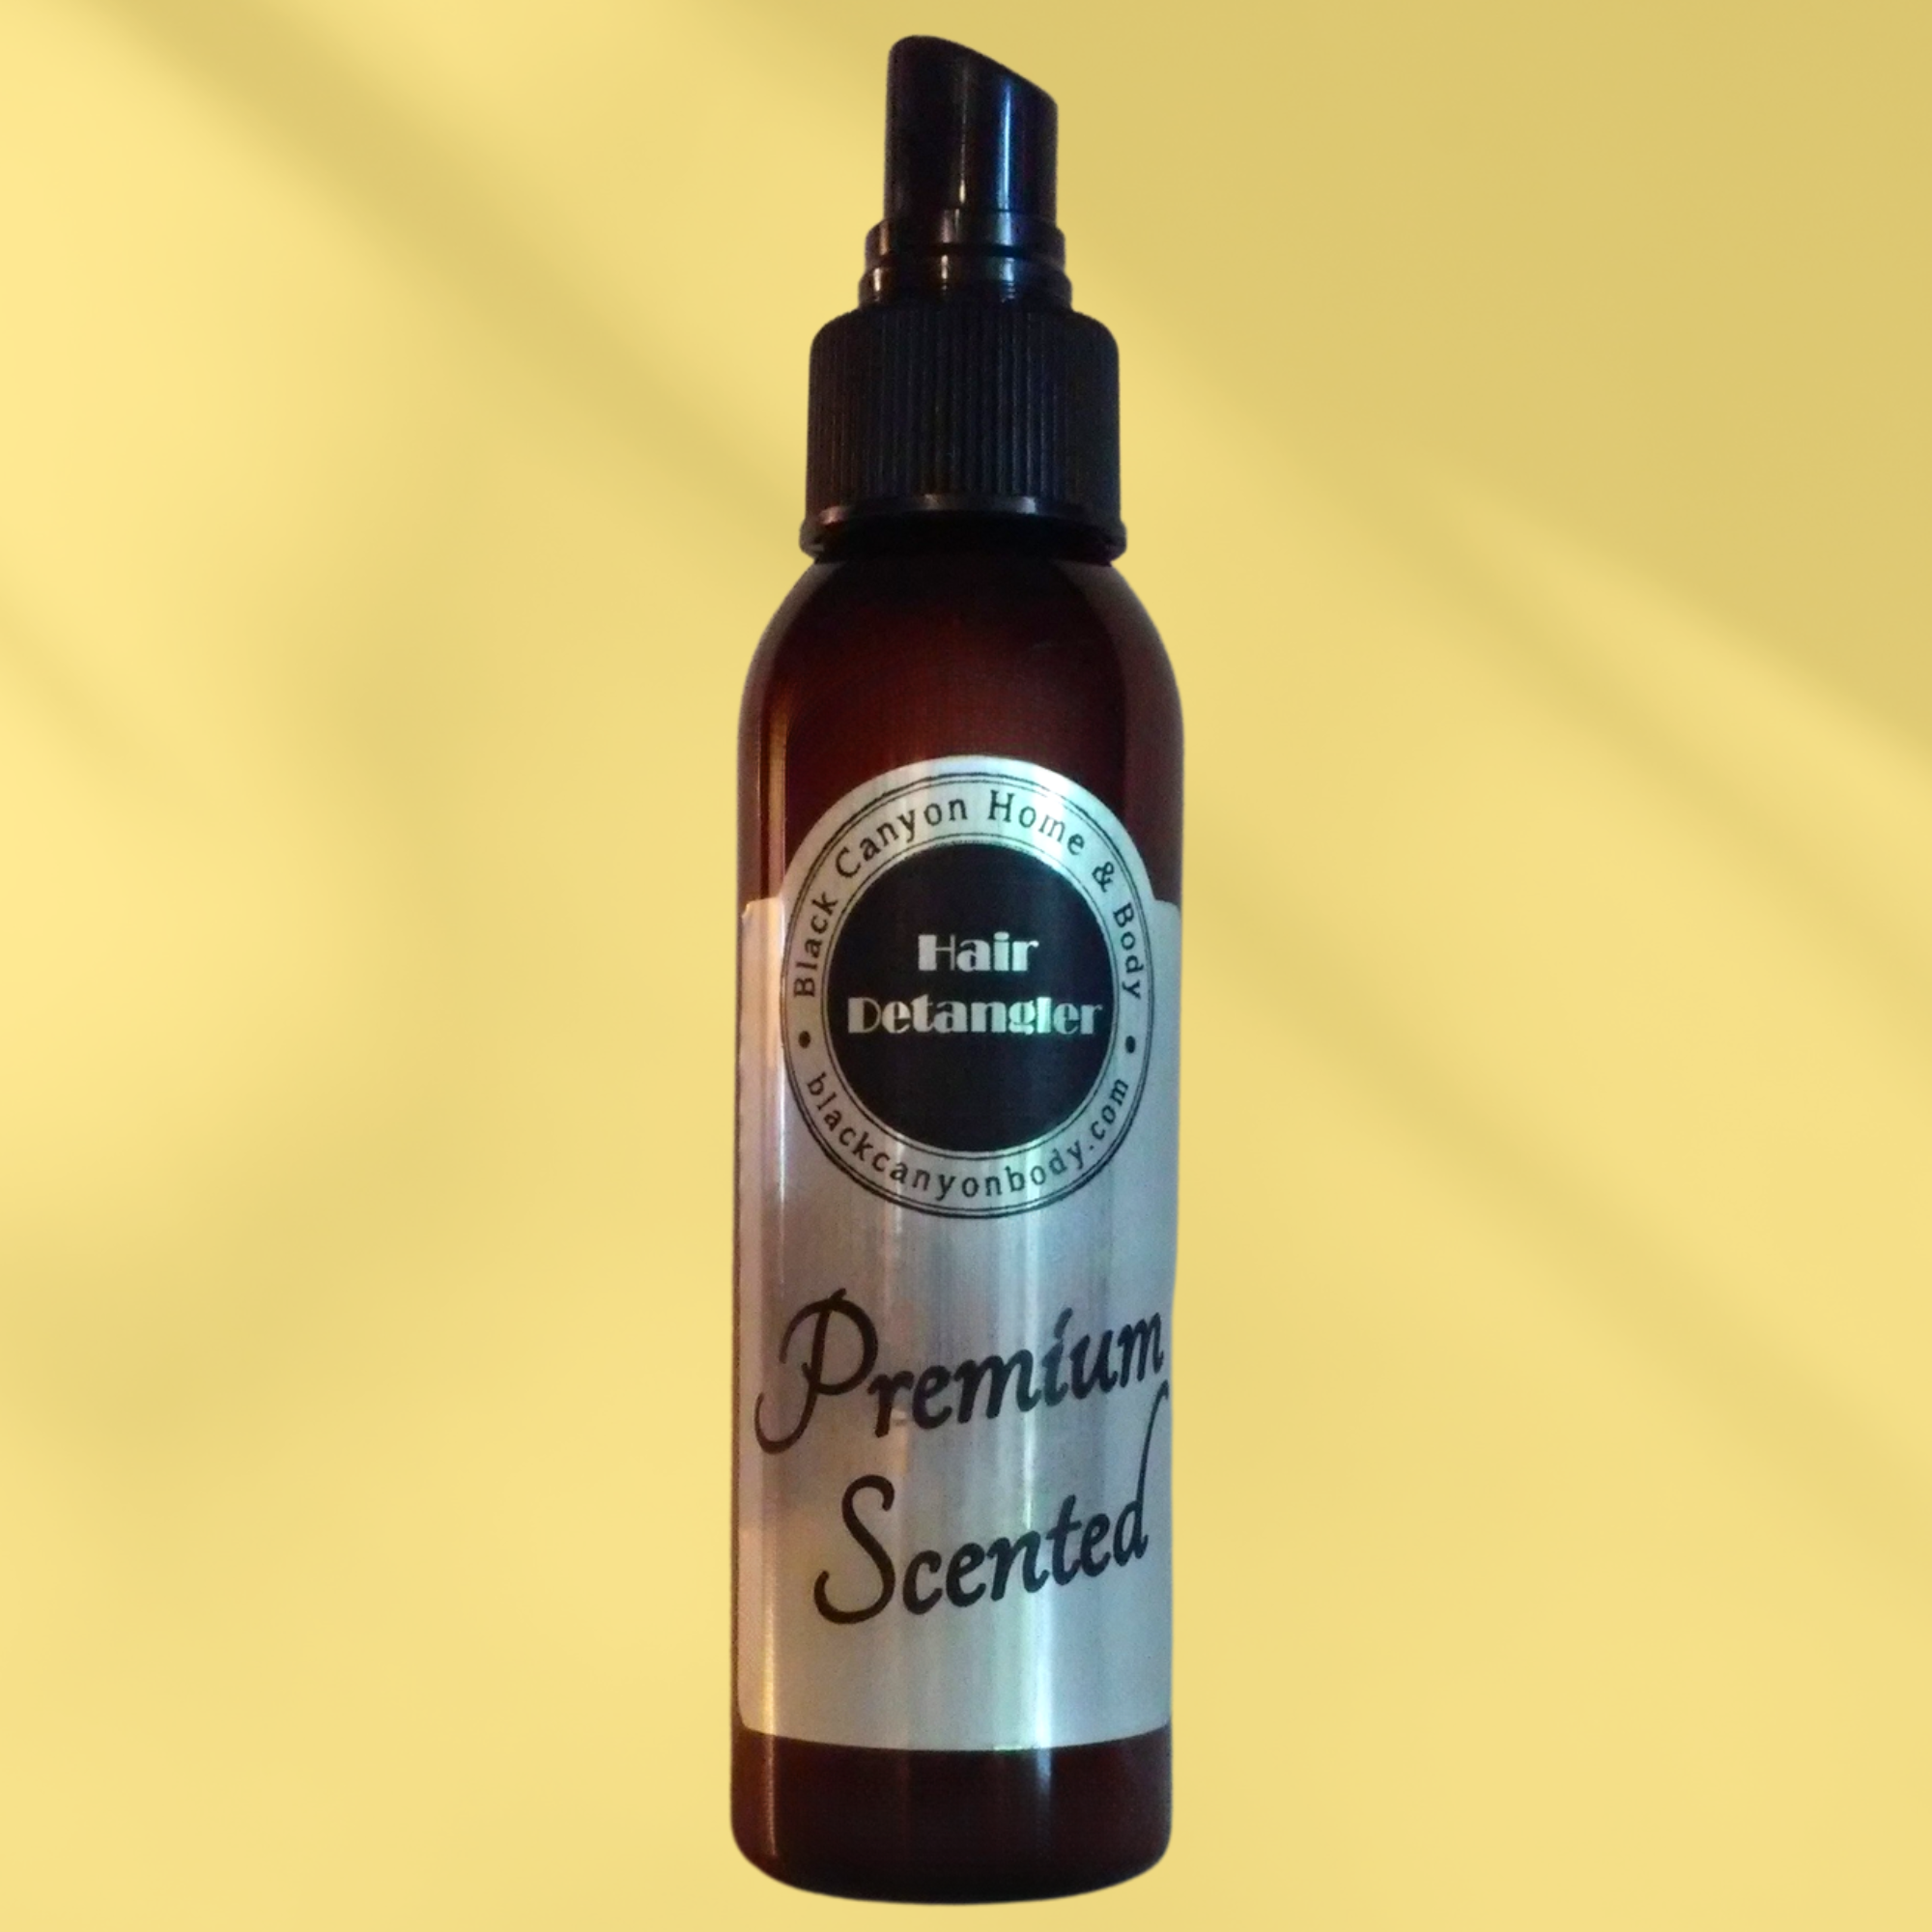 Black Canyon Grapefruit & Quince Scented Hair Detangler Spray with Olive Oil